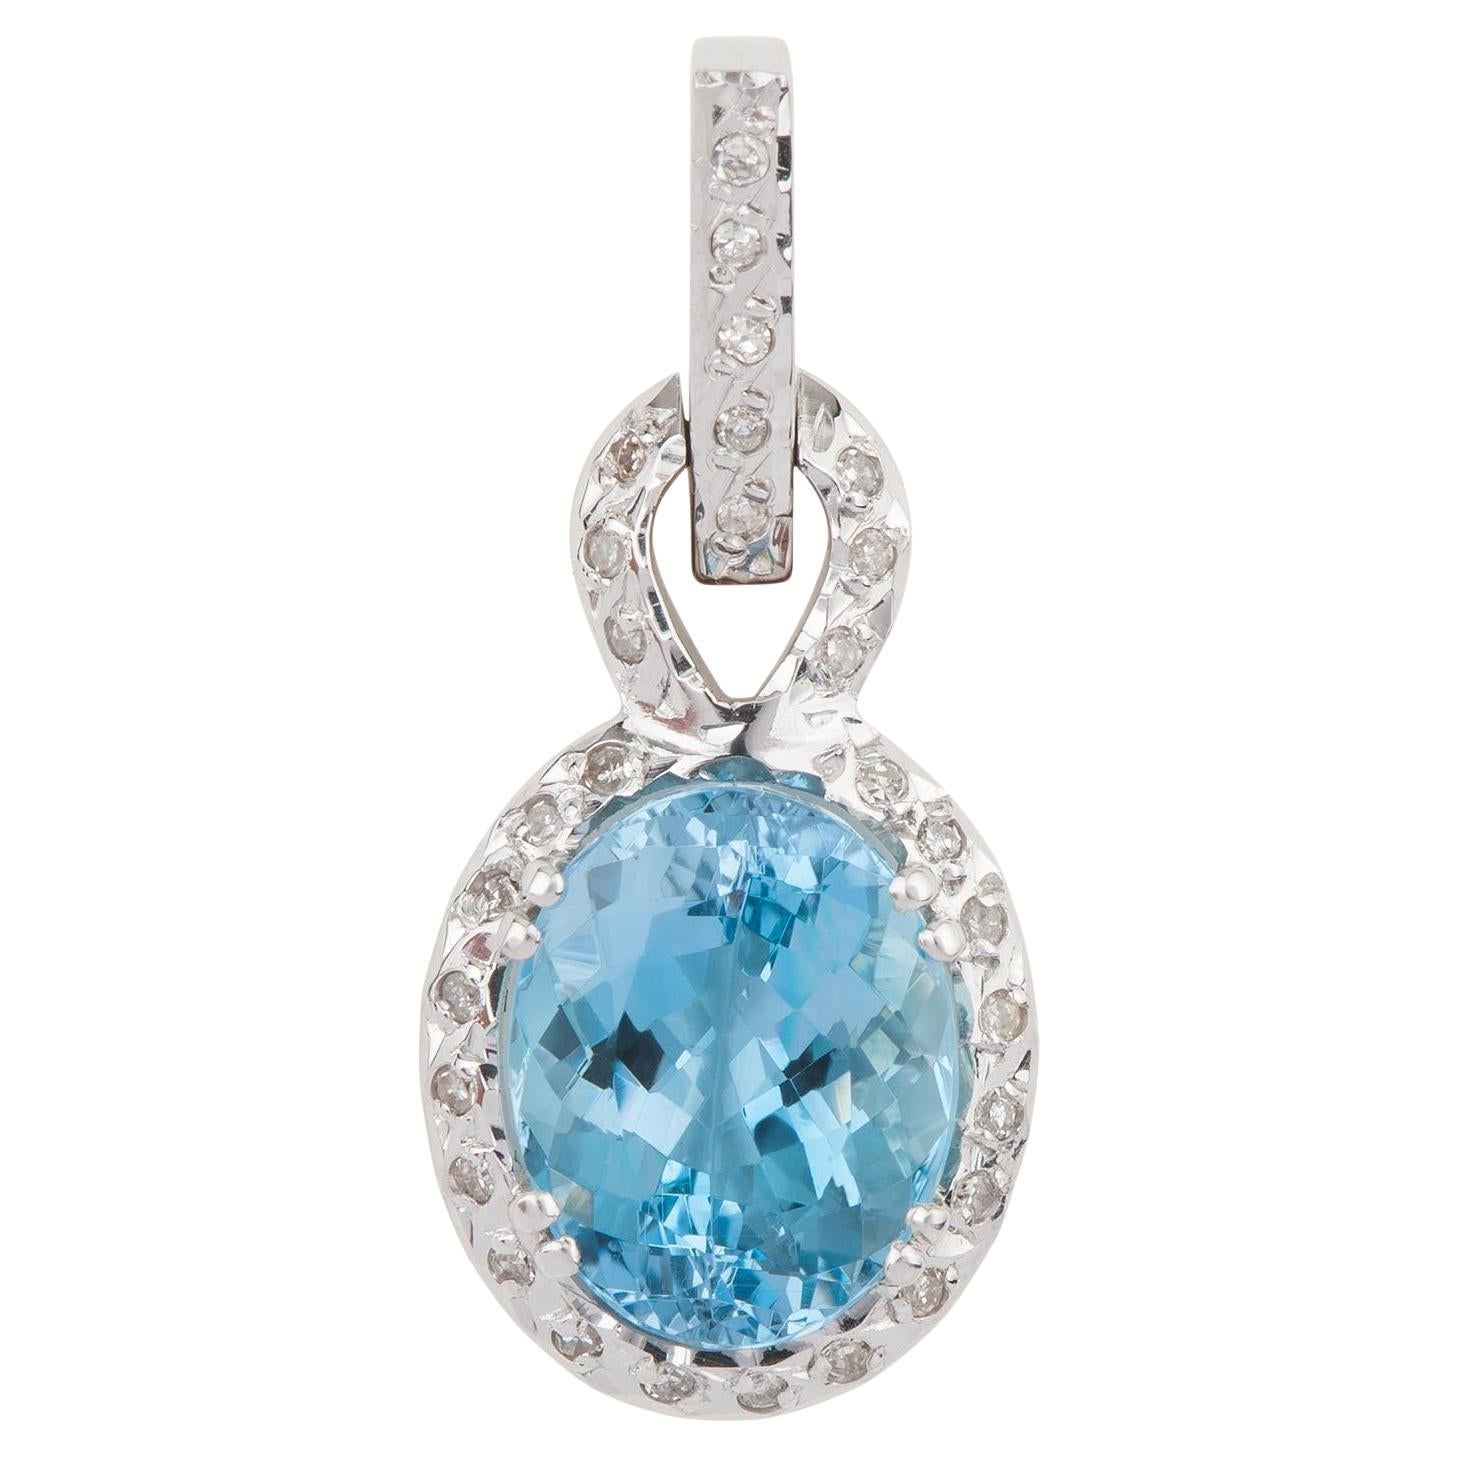 Admirable 18k White Gold and Aquamarine Pendant with Diamonds (P8270) For Sale